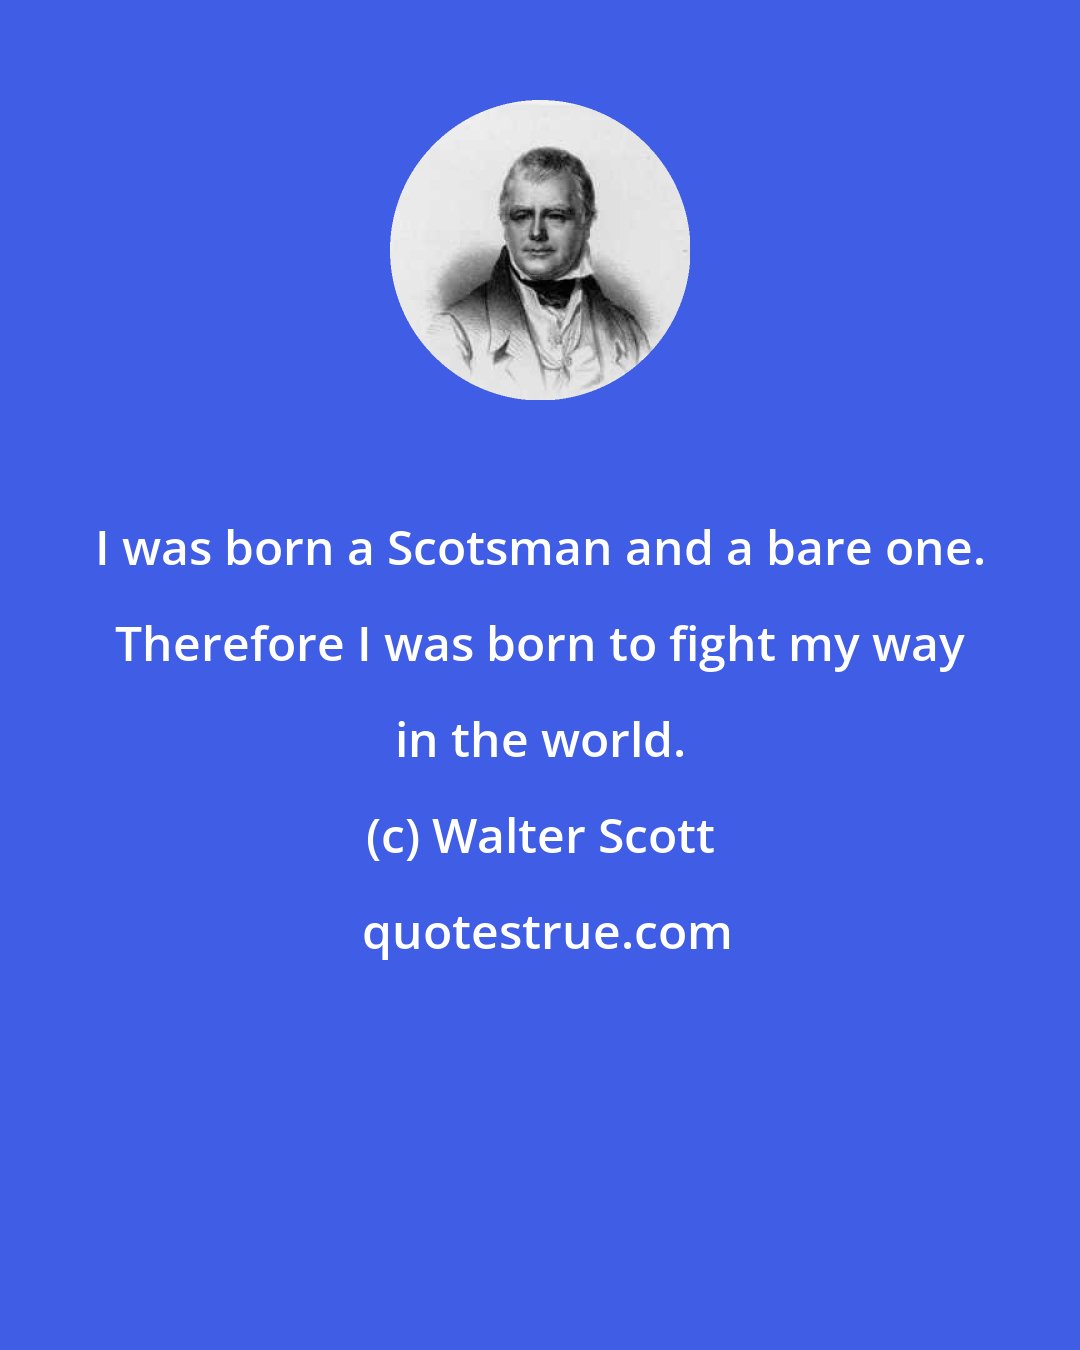 Walter Scott: I was born a Scotsman and a bare one. Therefore I was born to fight my way in the world.